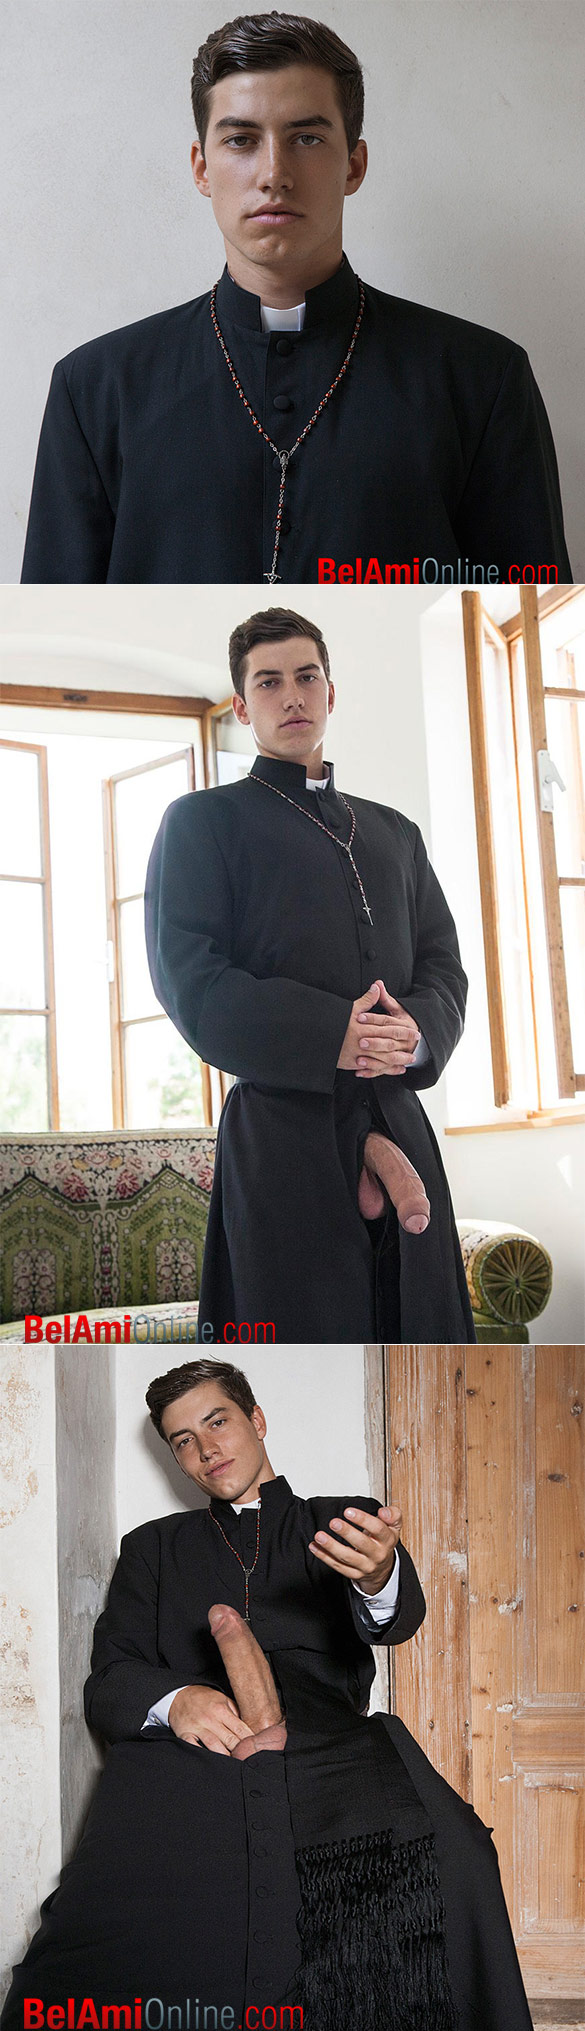 BelAmi: Brother Massimo (Joel Birkin) rubs one out in "Scandal in the Vatican 2 - Episode 1: Morning Devotions"